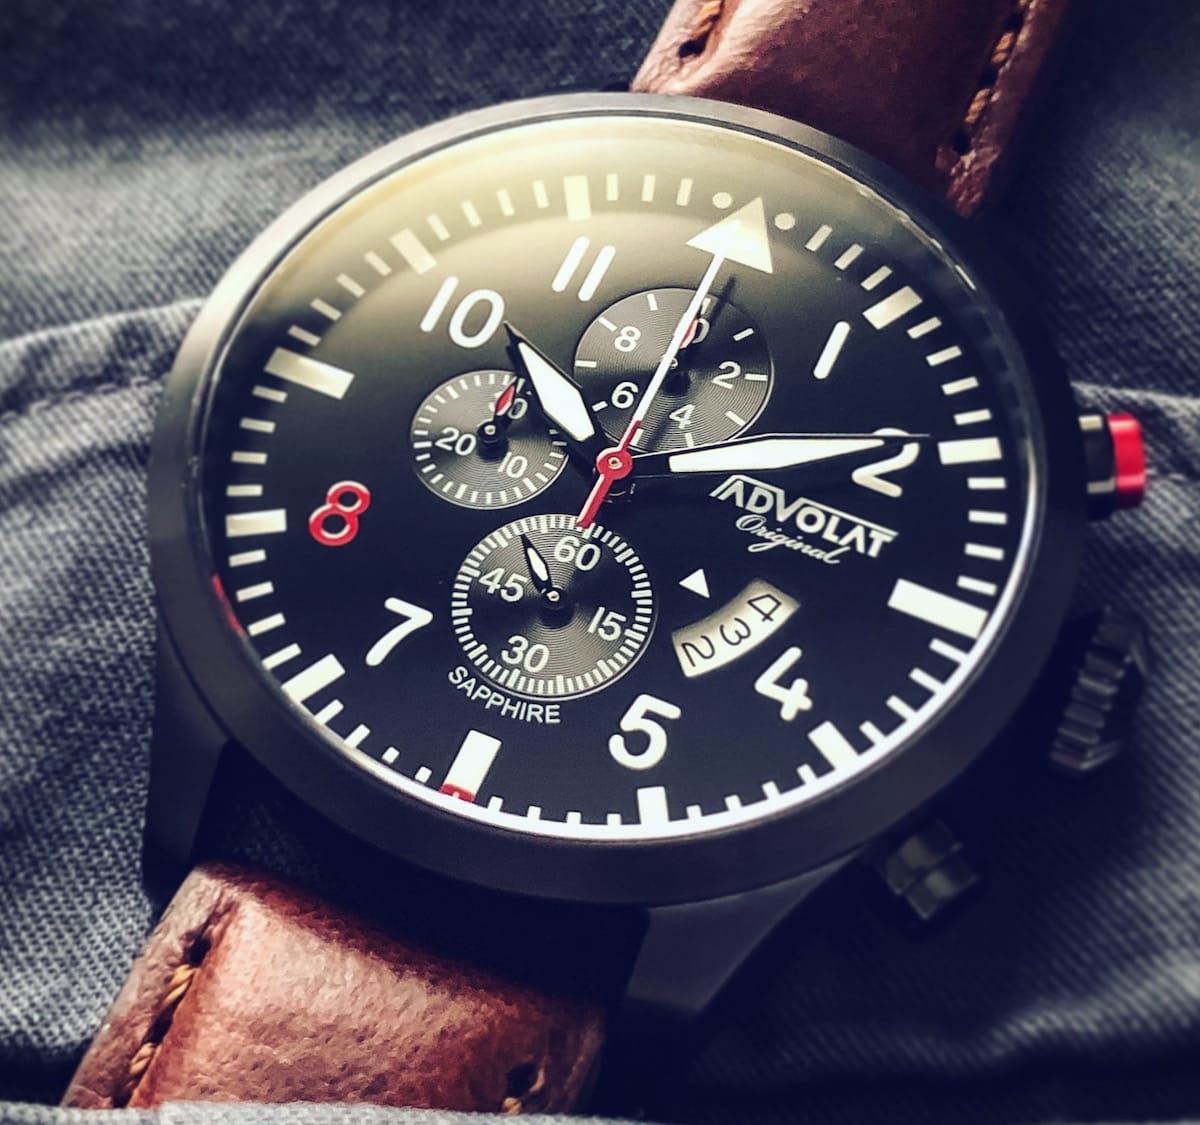 ADVOLAT FLIEGER 8 chronograph pilot watch has exceptional engineering and components